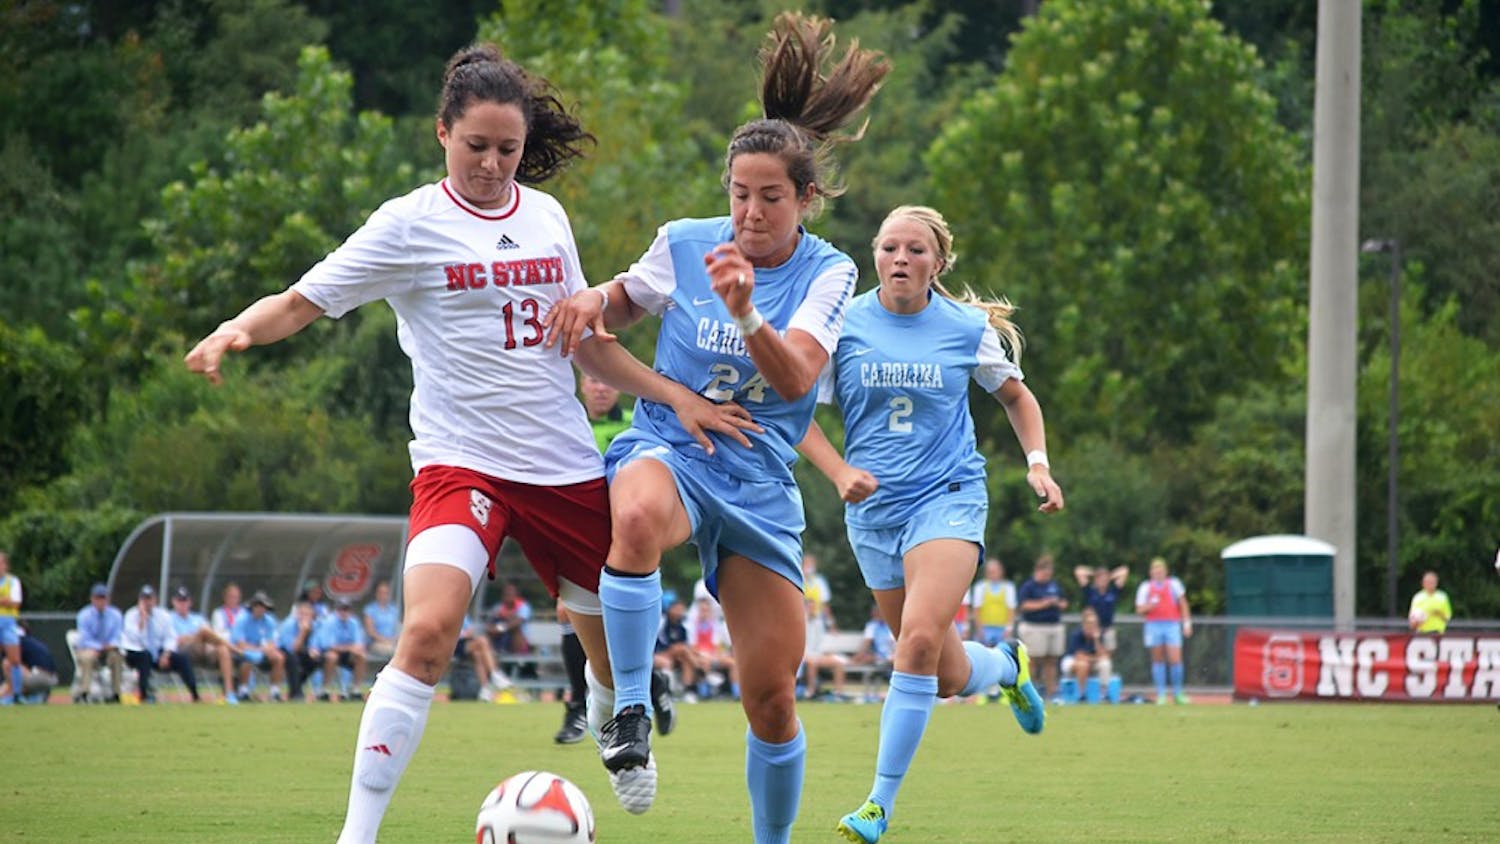 UNC's Paige Nielson (24) and NC State's Franziska Jaser (13) battle for the ball at Sunday's soccer game in Raleigh, North Carolina.  The Lady Tar Heel's won 2-1 against the Lady Wolfpack.